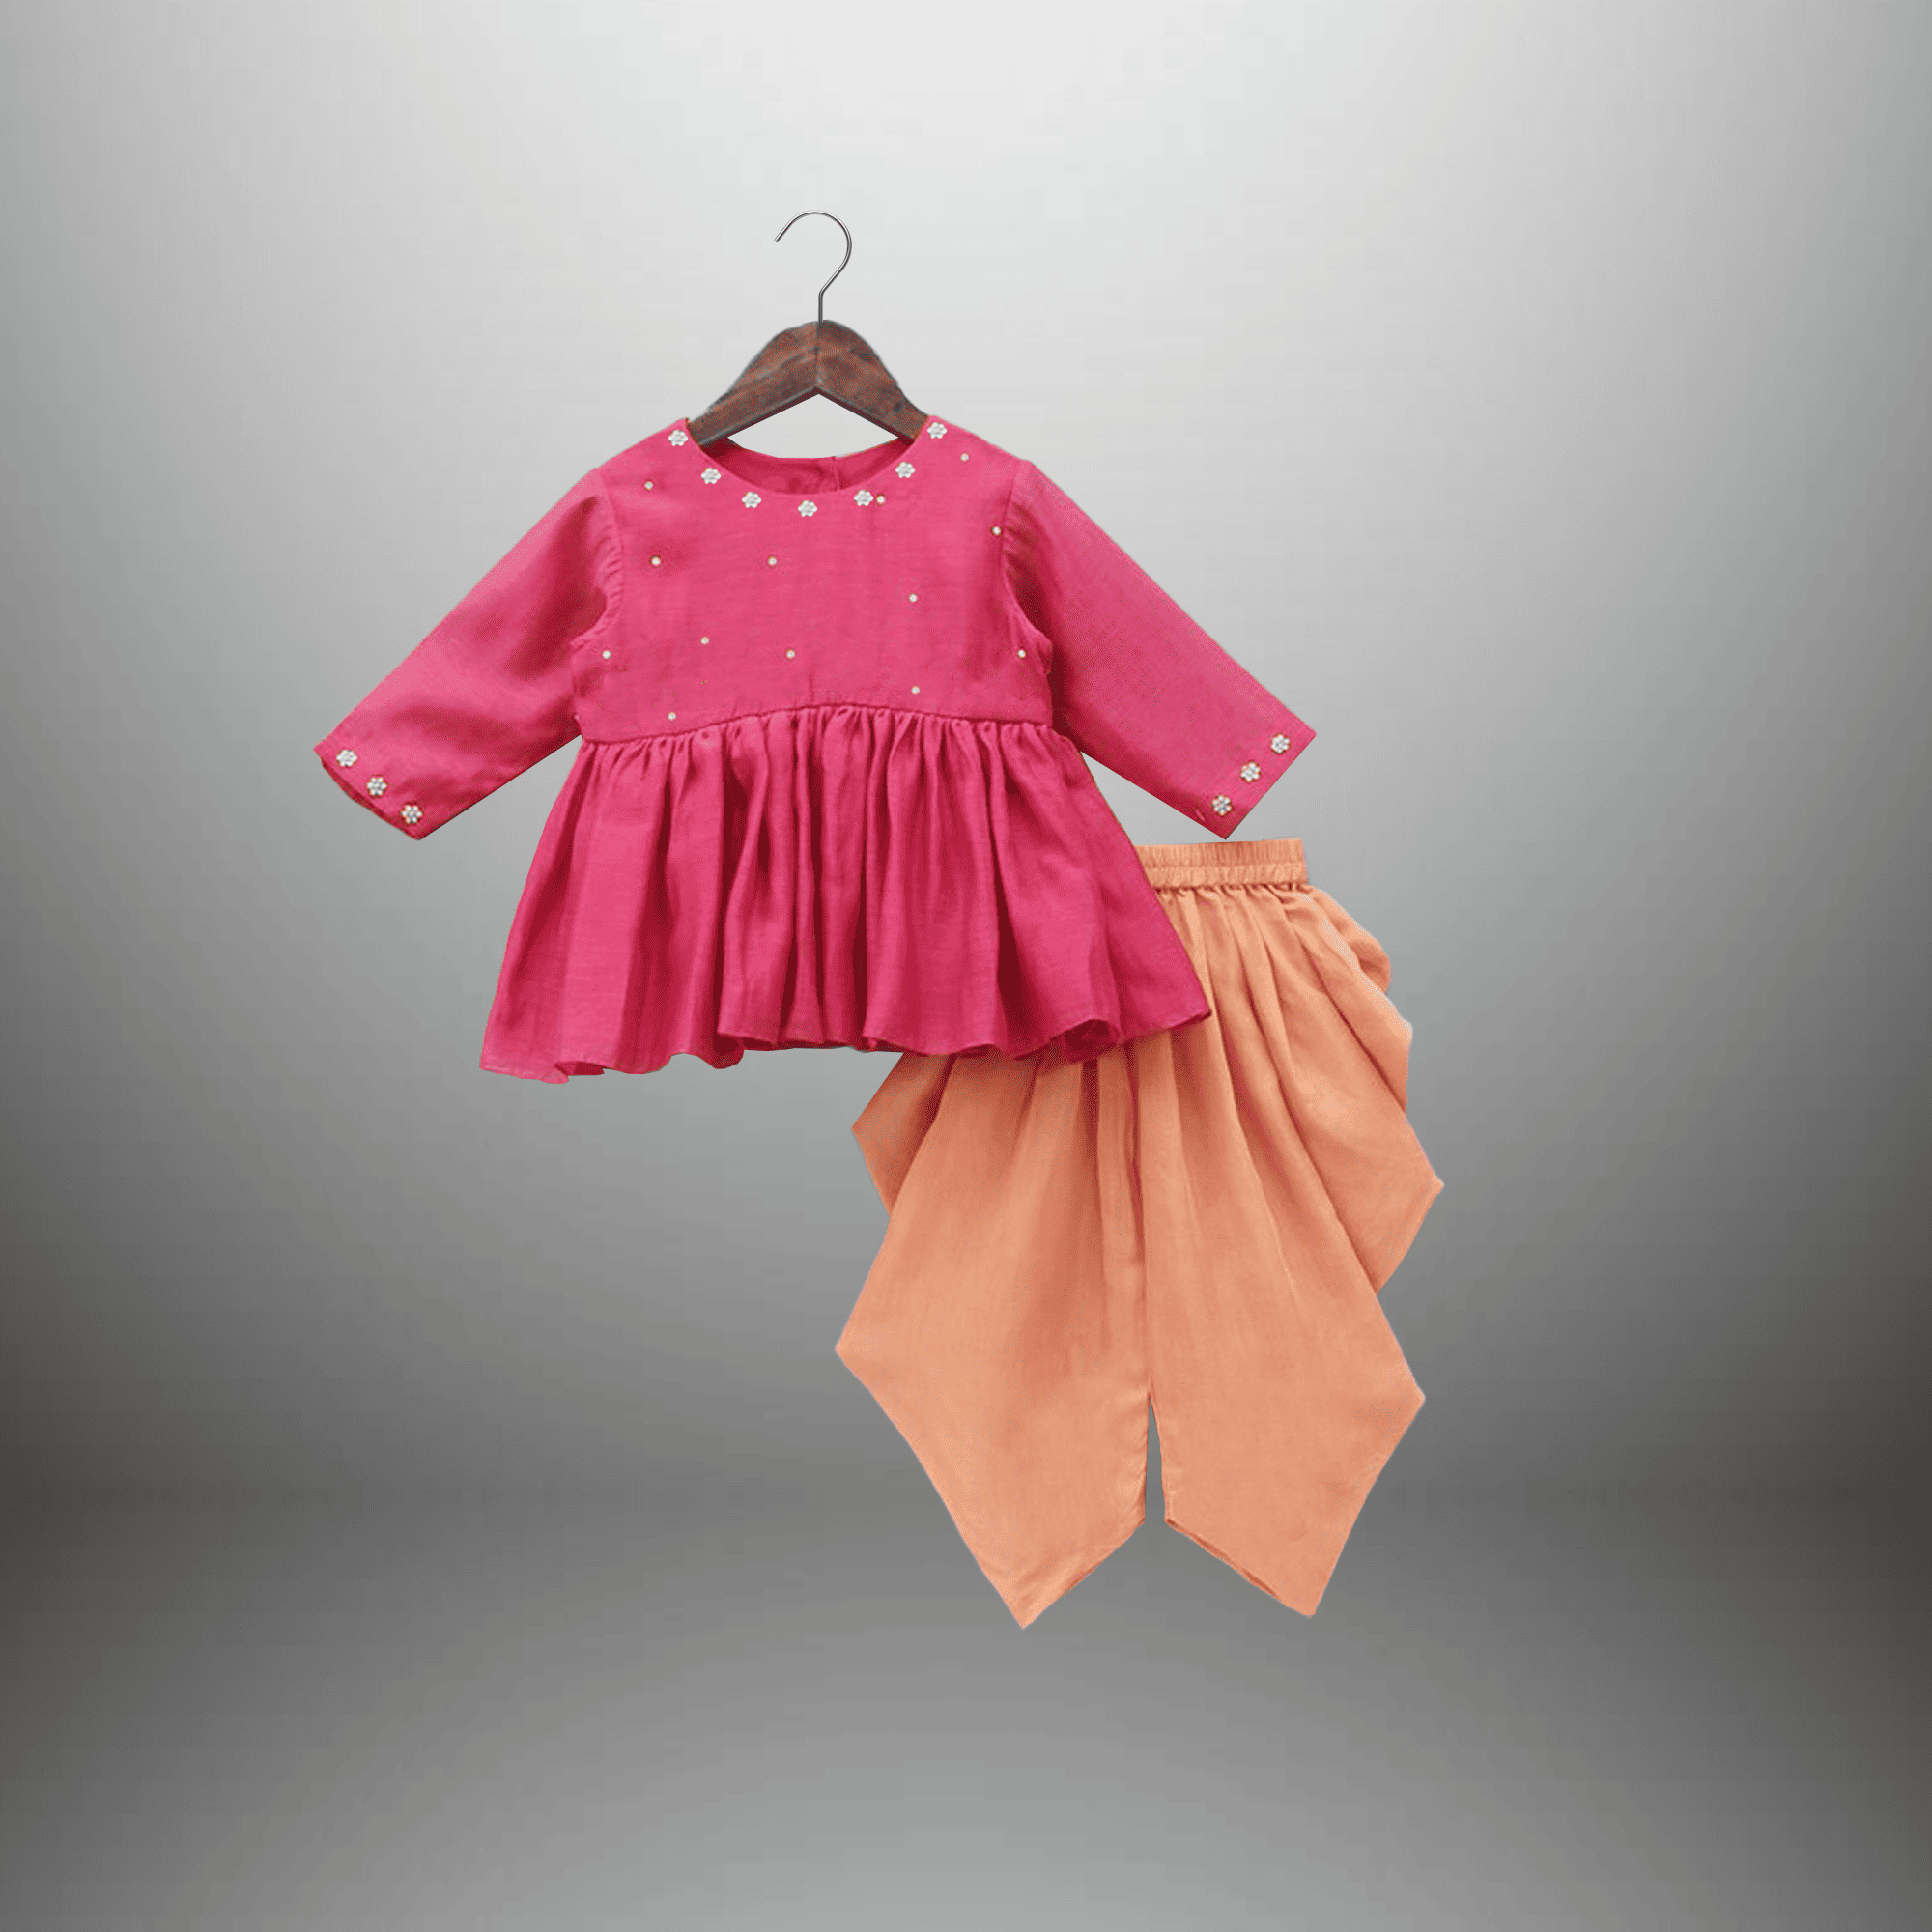 Girl's Indo western 2 piece set of Pink Flared Kurti and Peach Dhoti pant-RKFCW516